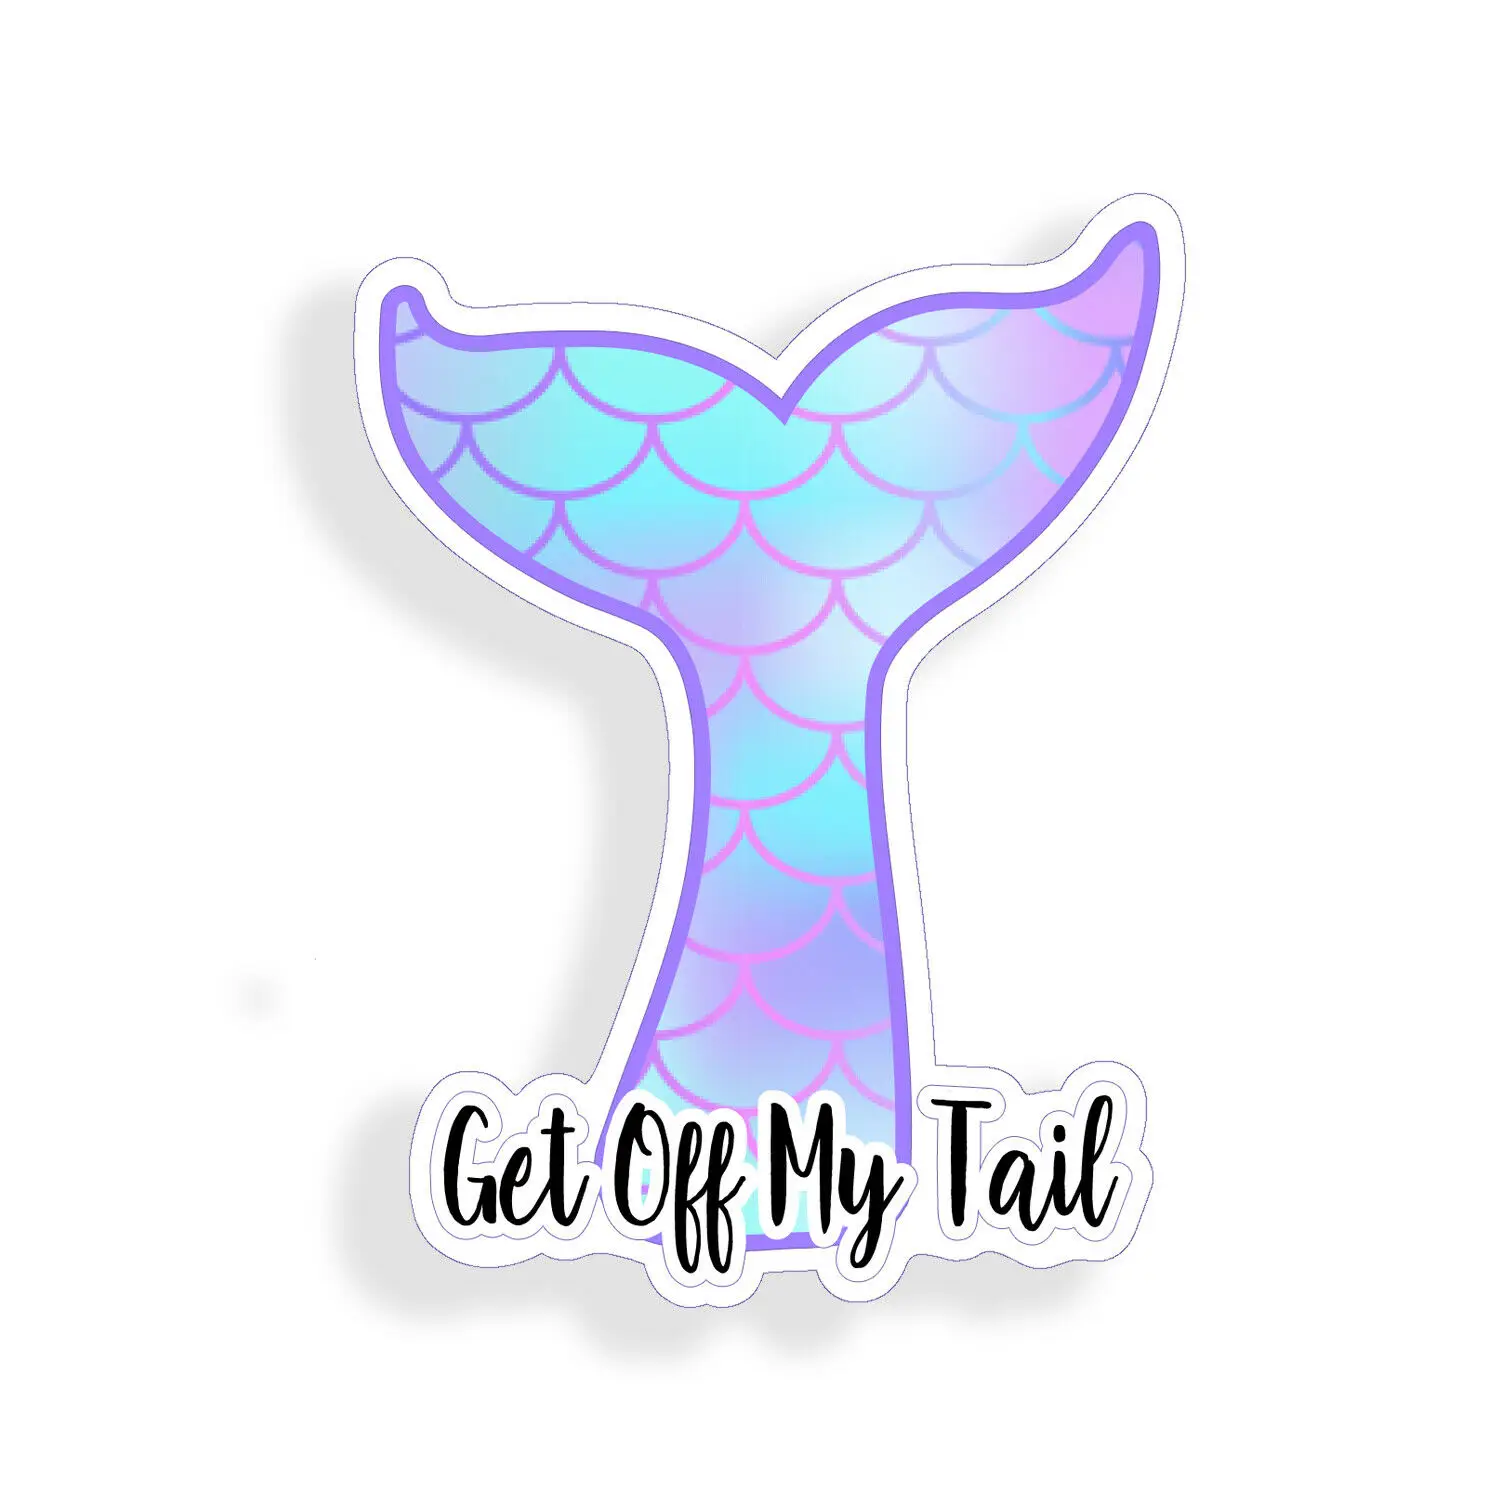 

Personalized stickers 5" Get Off My Tail Mermaid Sticker Laptop Cup Car Vehicle Window Bumper Decal Waterproof Vinyl Decals